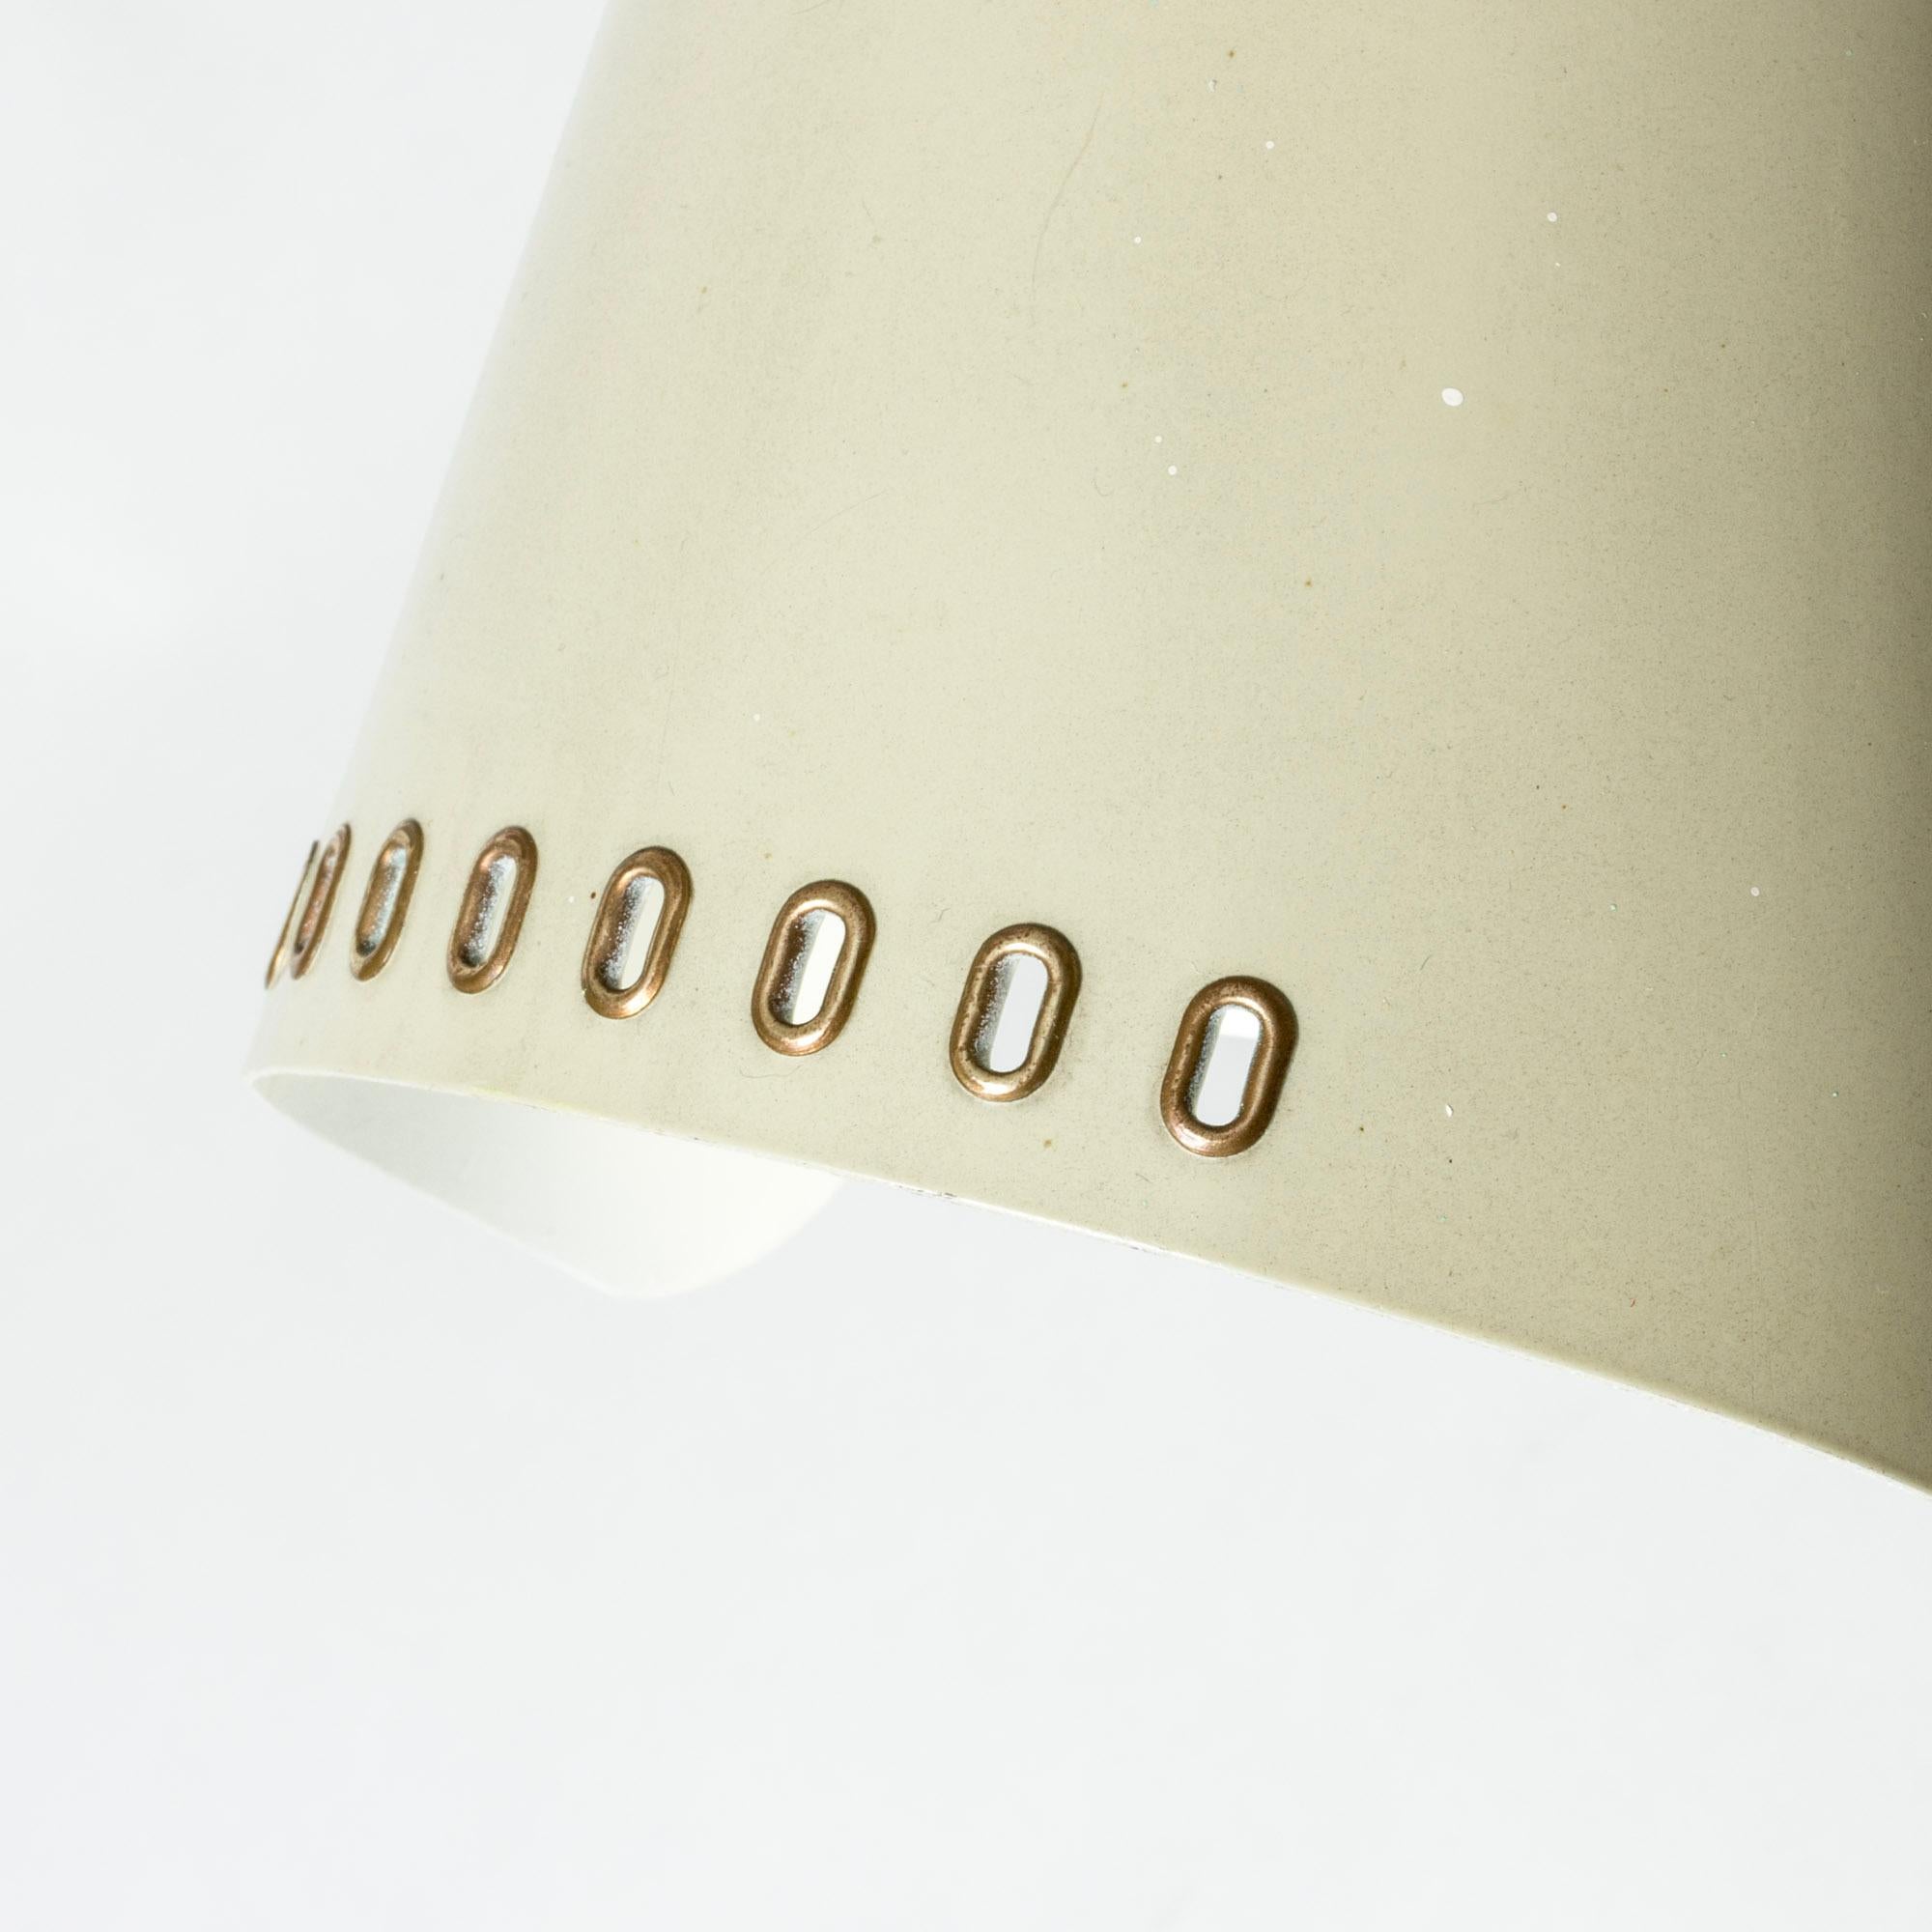 Mid-20th Century Swedish Modern Brass Table Lamp from Fåglavik, Sweden, 1950s For Sale